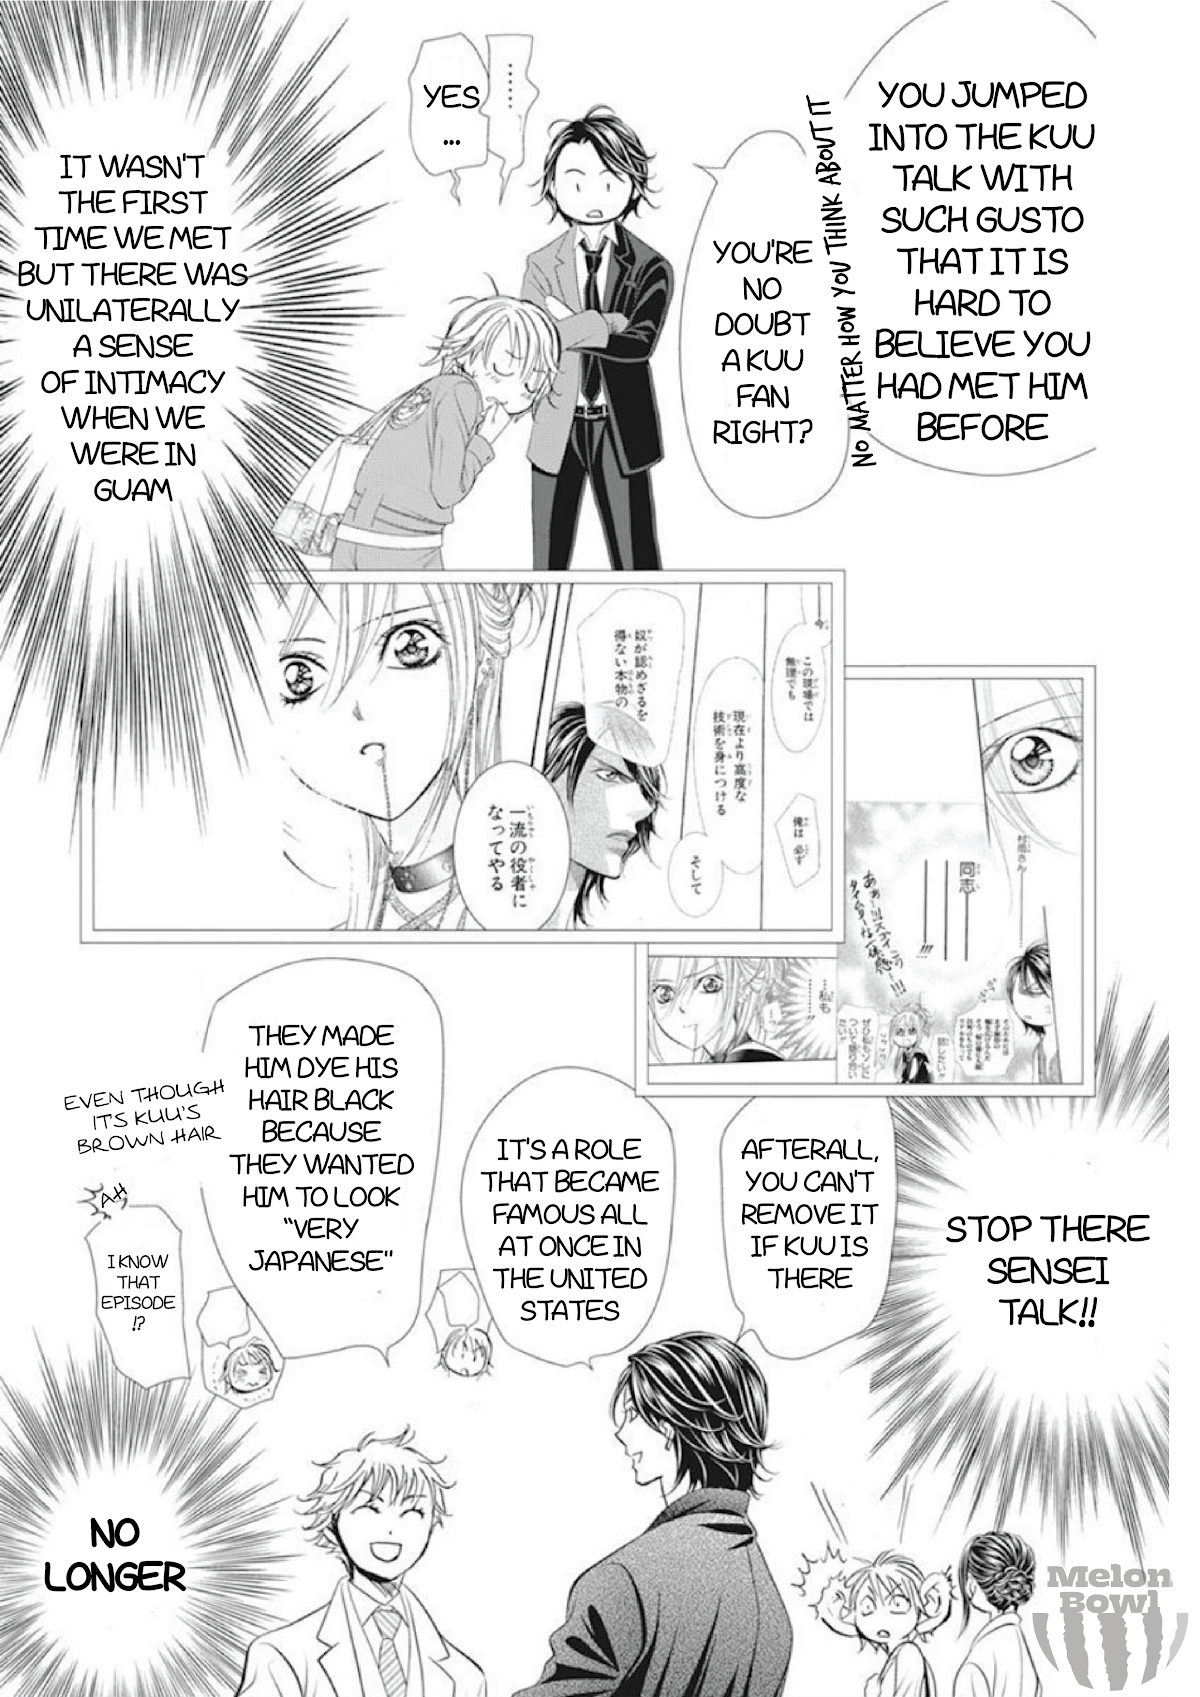 Skip Beat!, Chapter 306 Fairy Tale Dialogue image 10